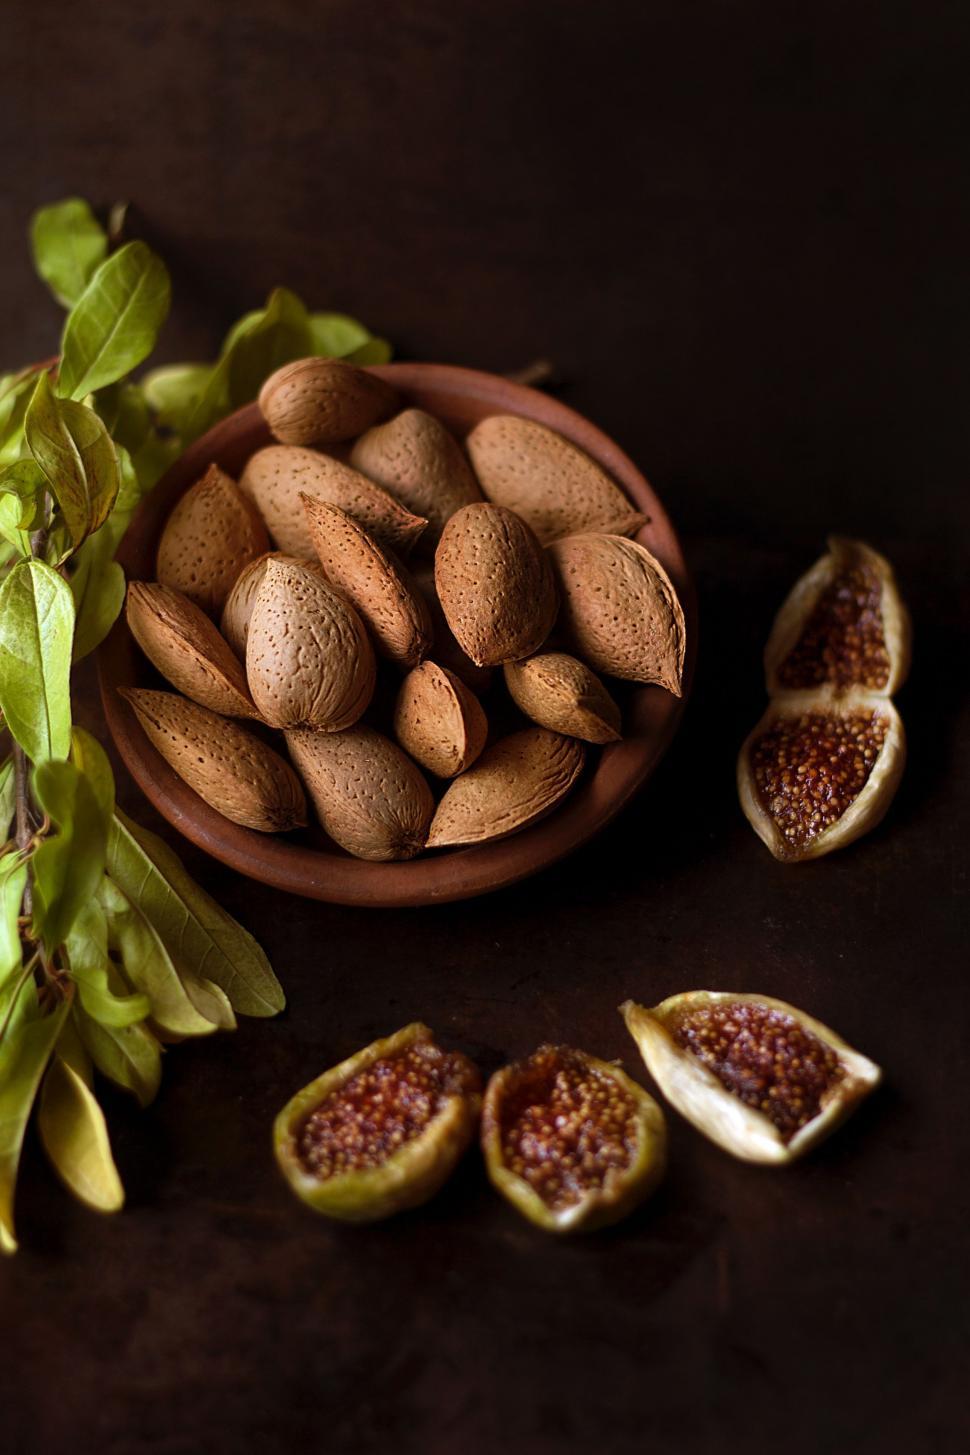 Free Image of Bowl of Nuts Next to Leaves 